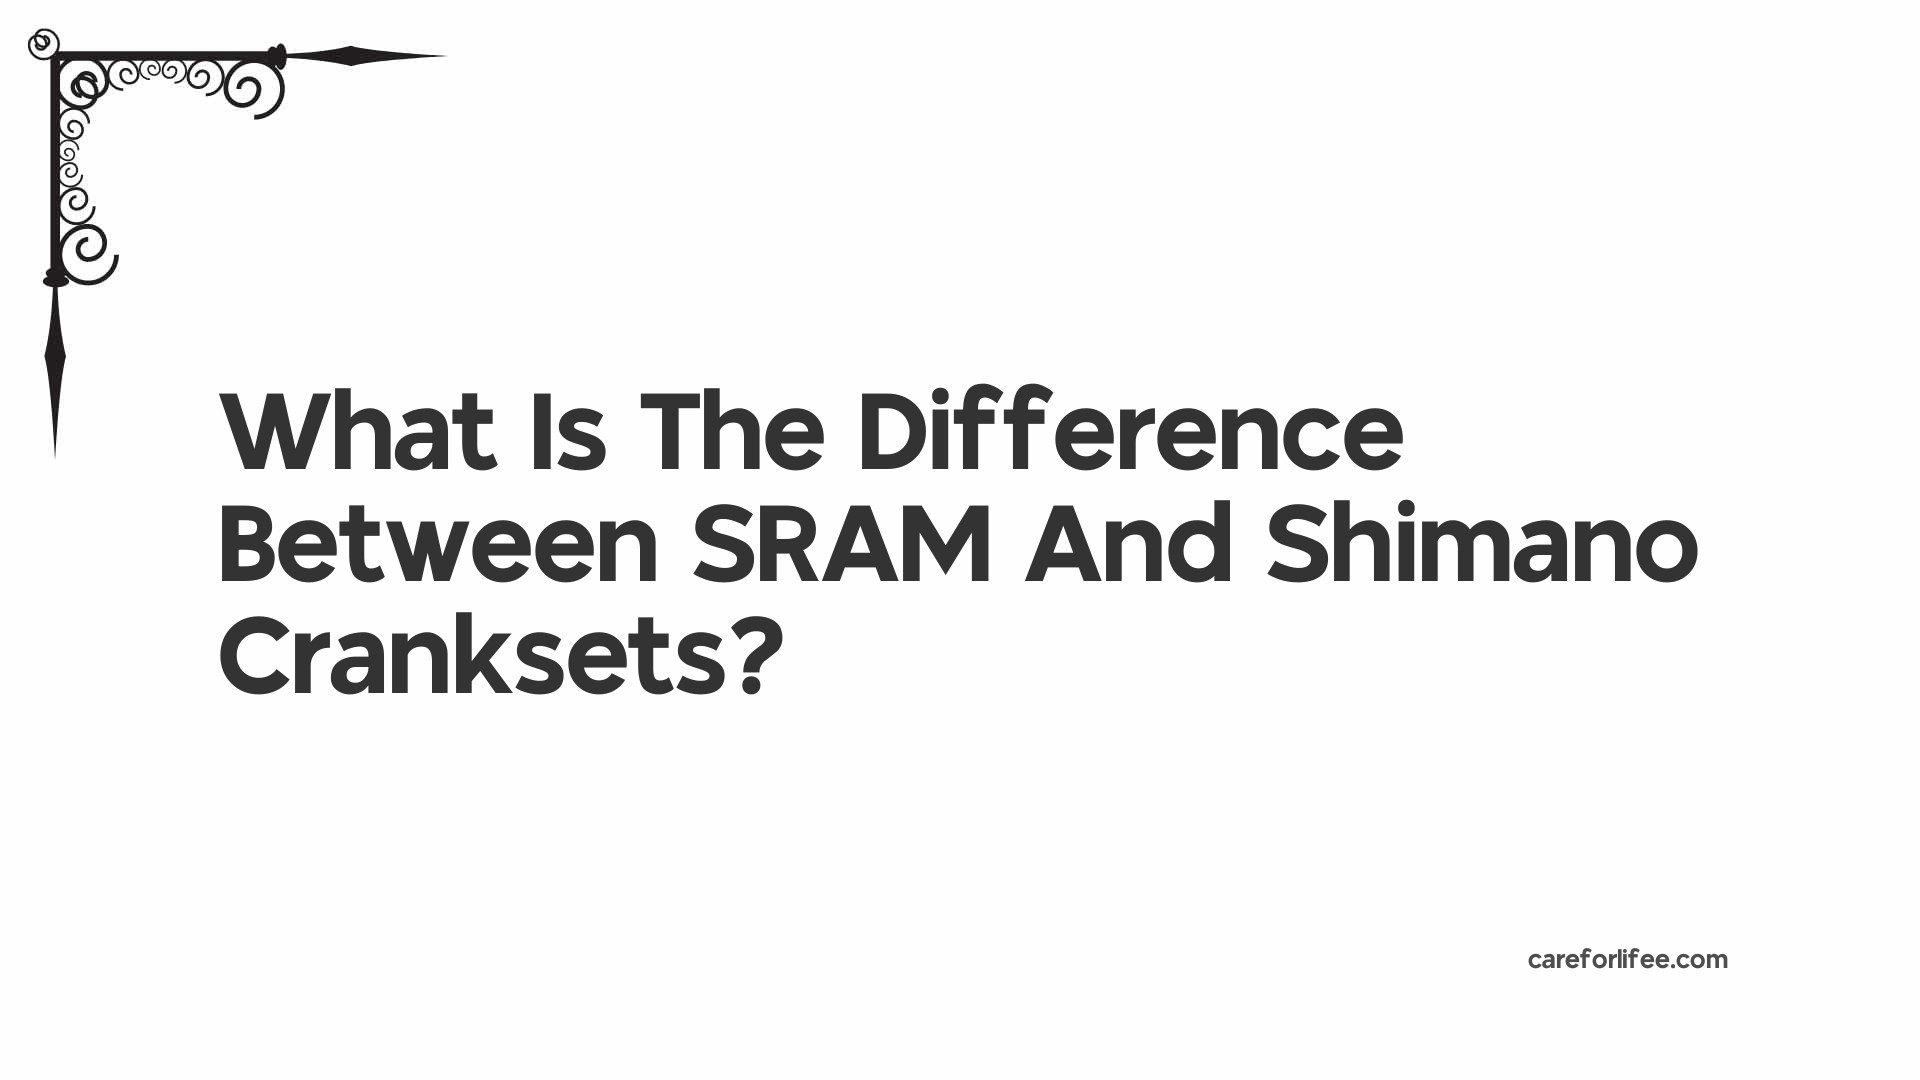 What Is The Difference Between SRAM And Shimano Cranksets?